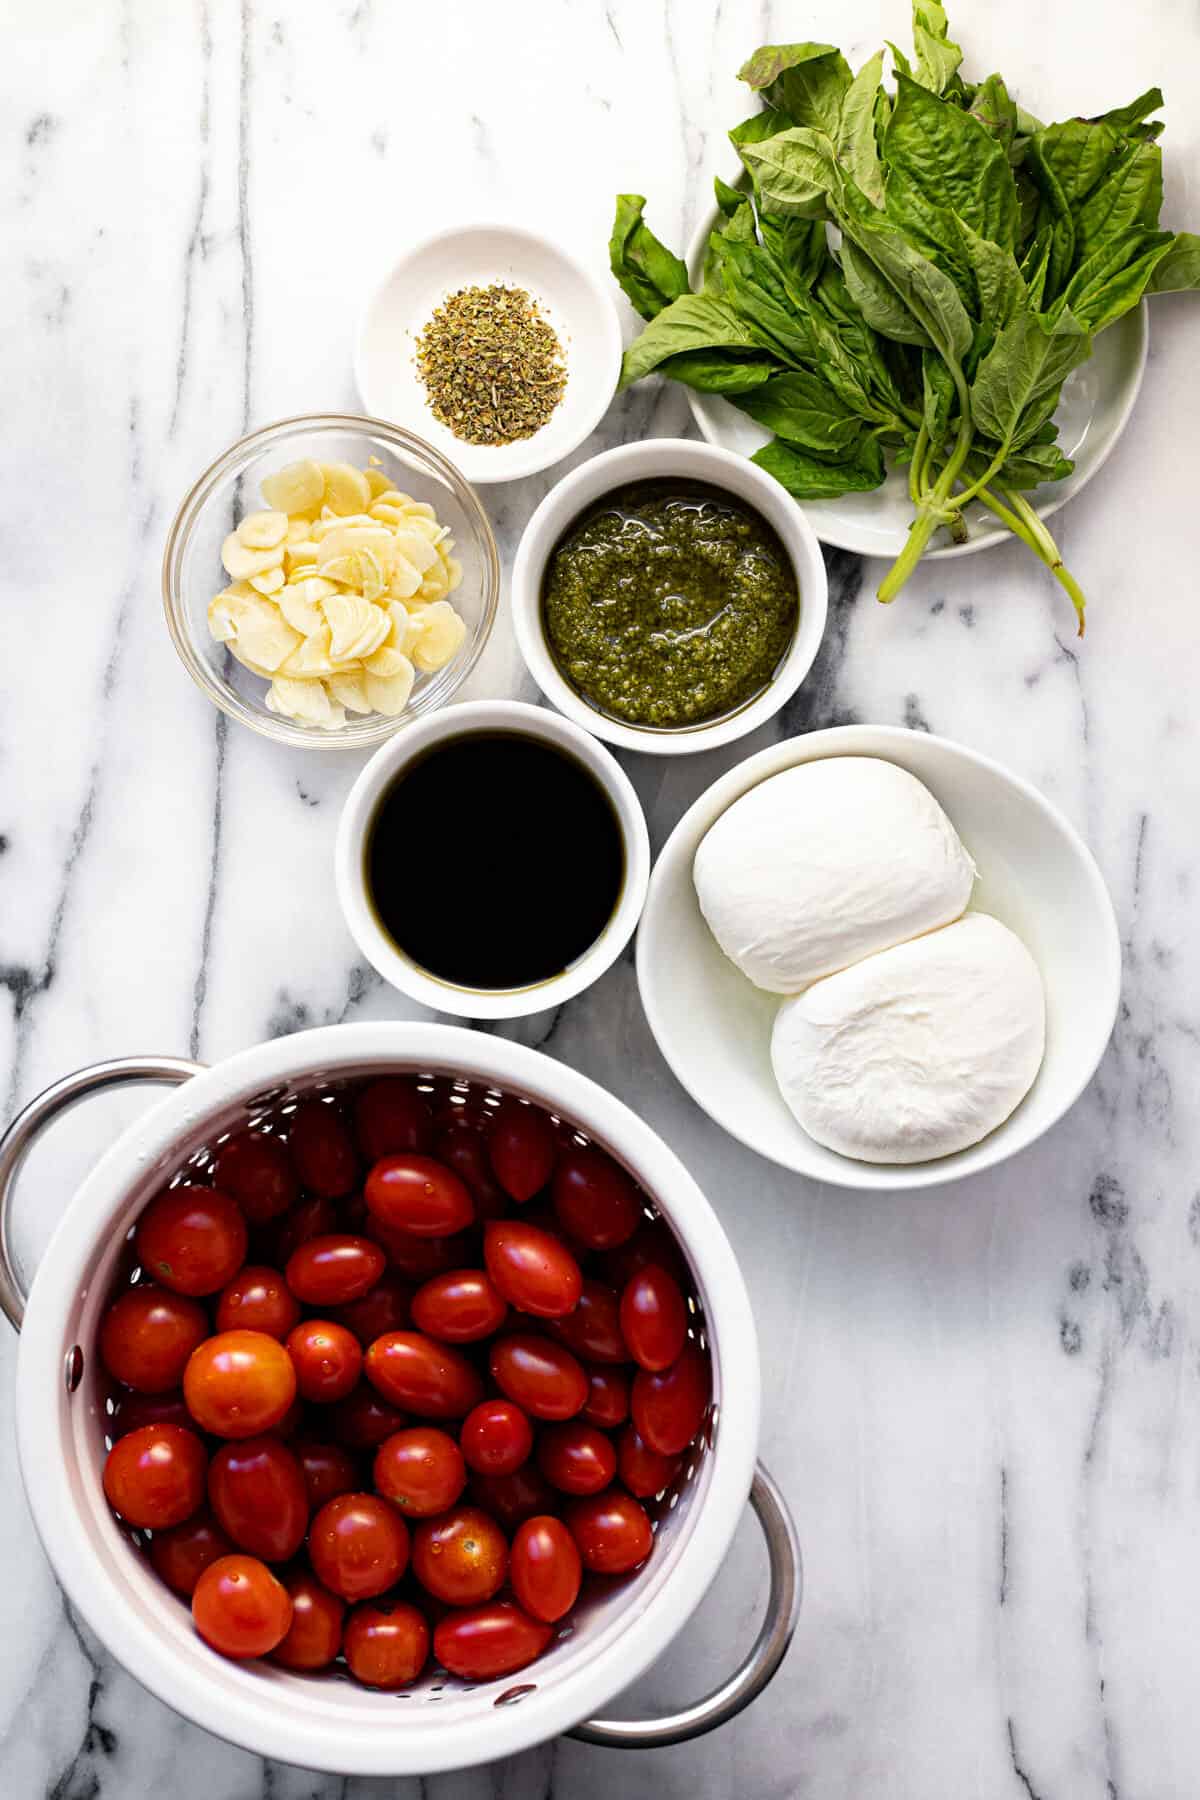 White marble counter top with ingredients to make tomato burrata salad.